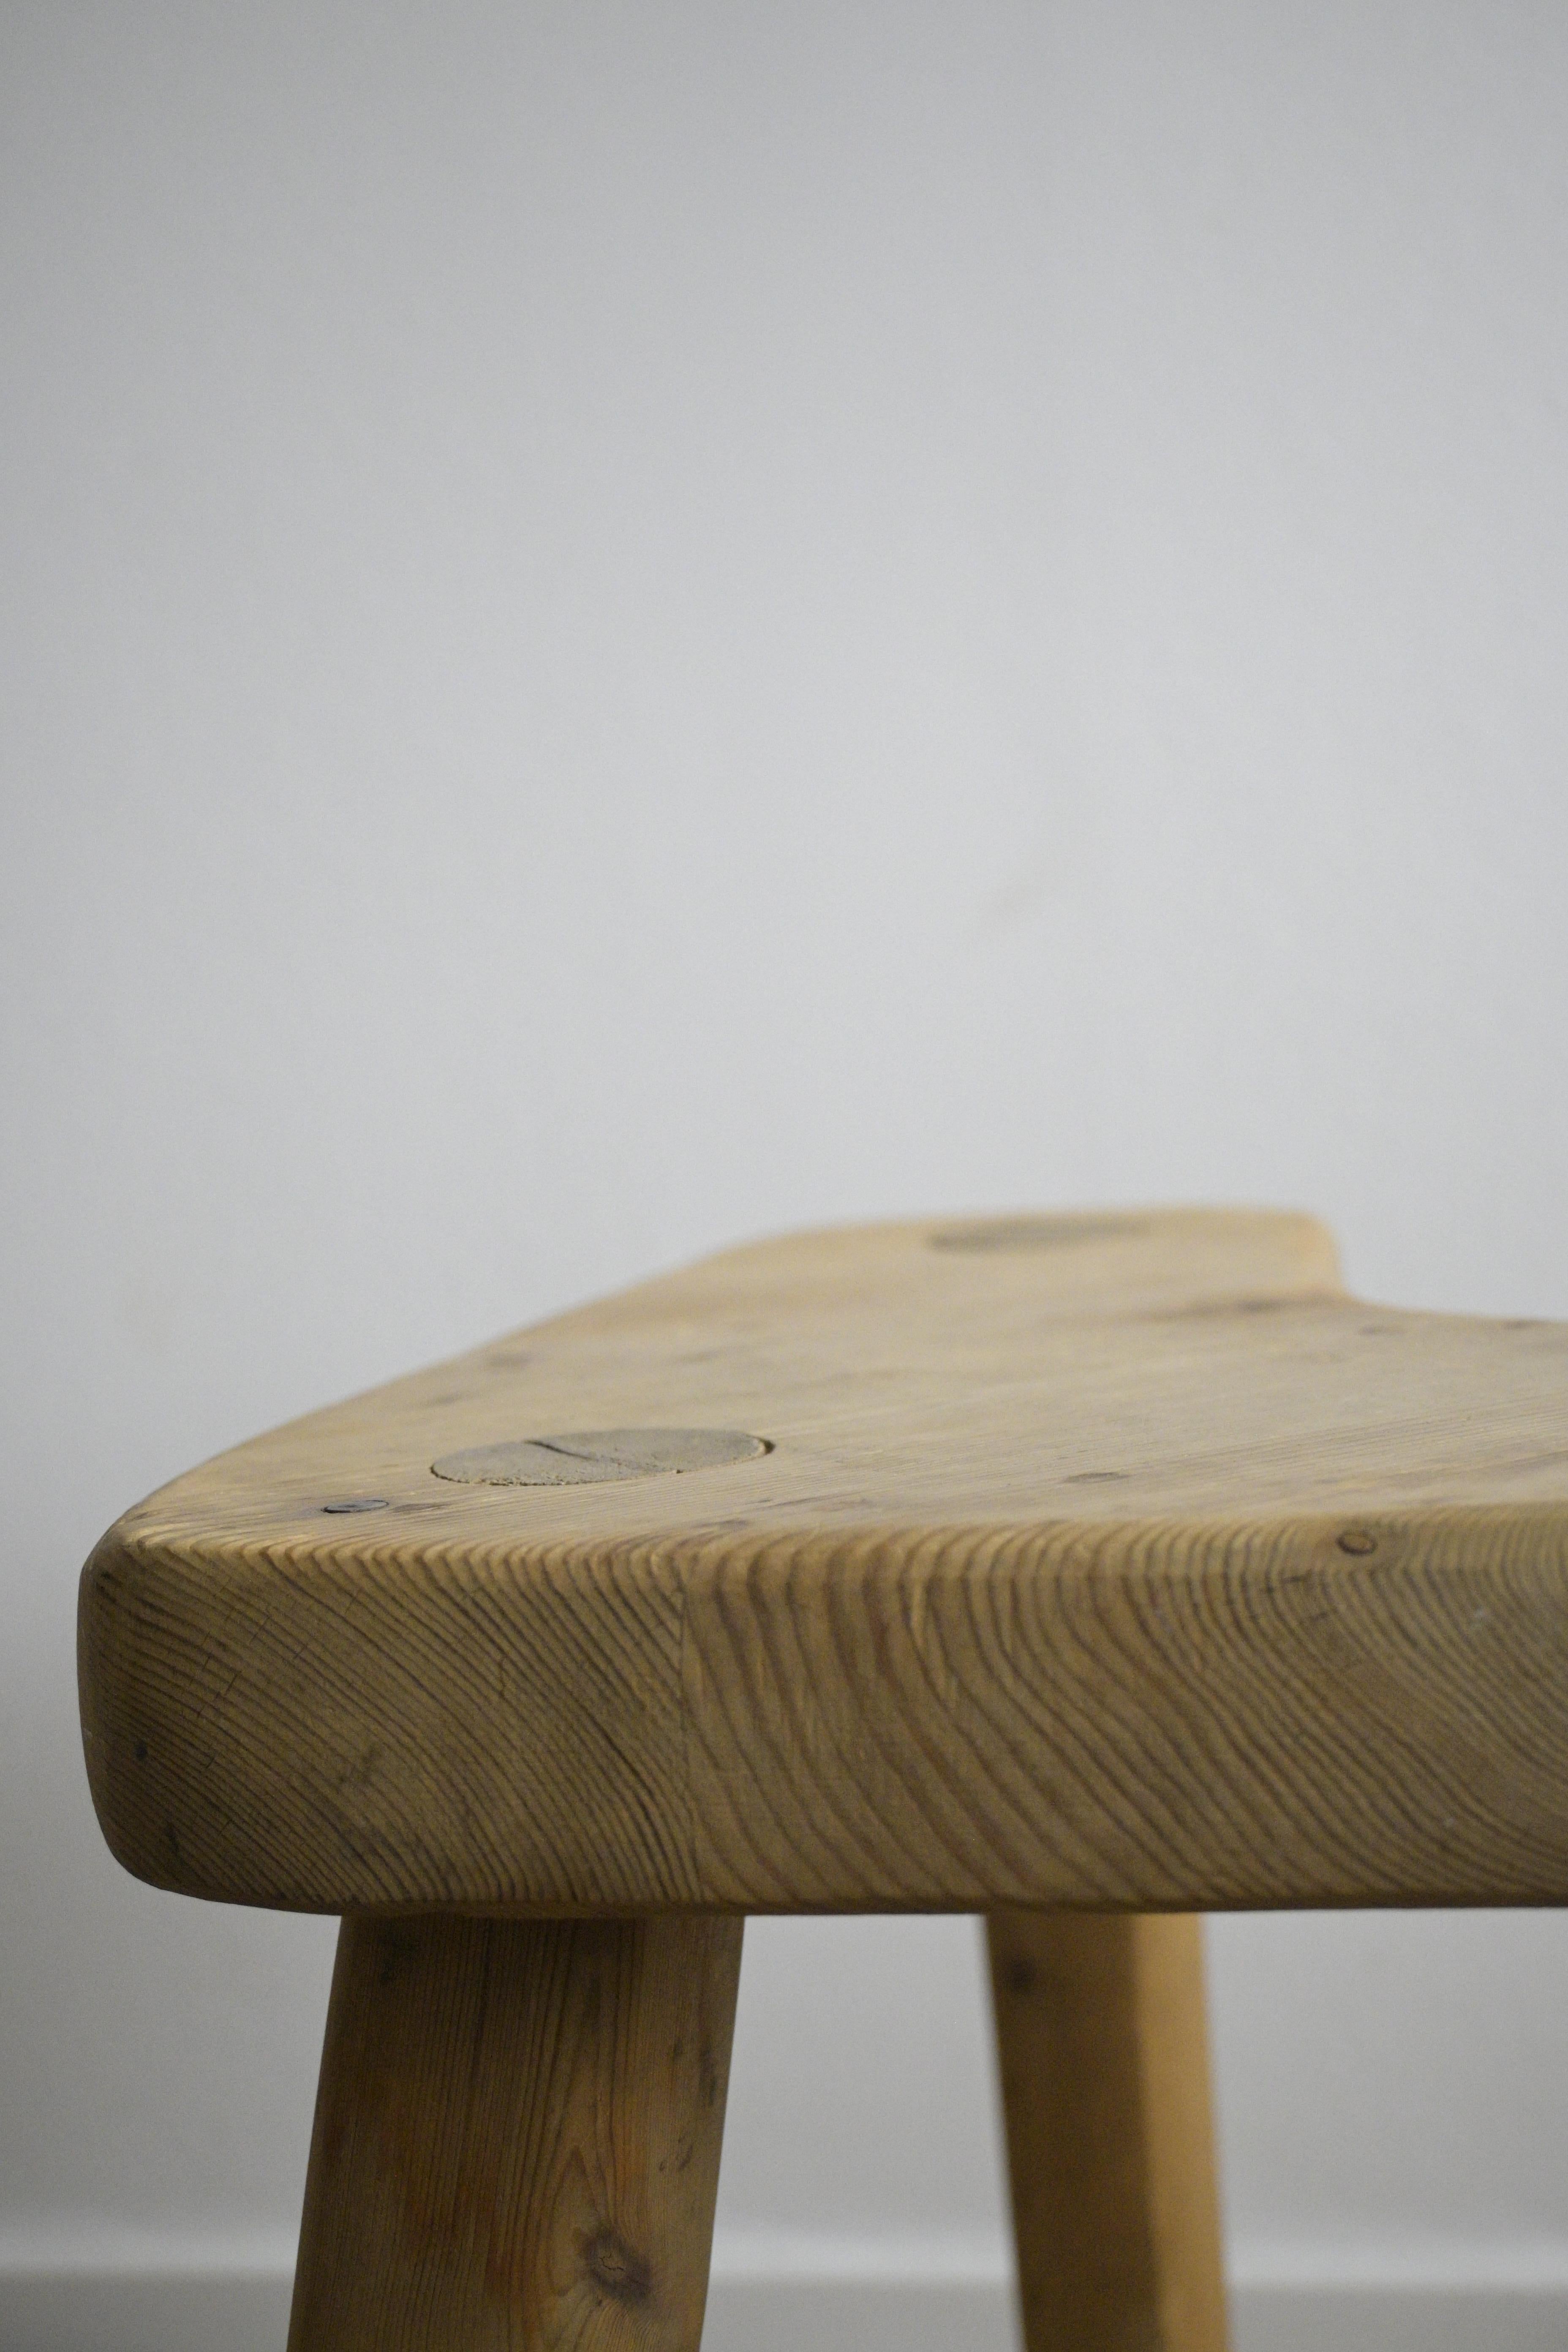 Hand-Crafted Unsymmetric Pine Stool or Side Table by Stig Sandqvist, Vemdalen, Sweden 1950s